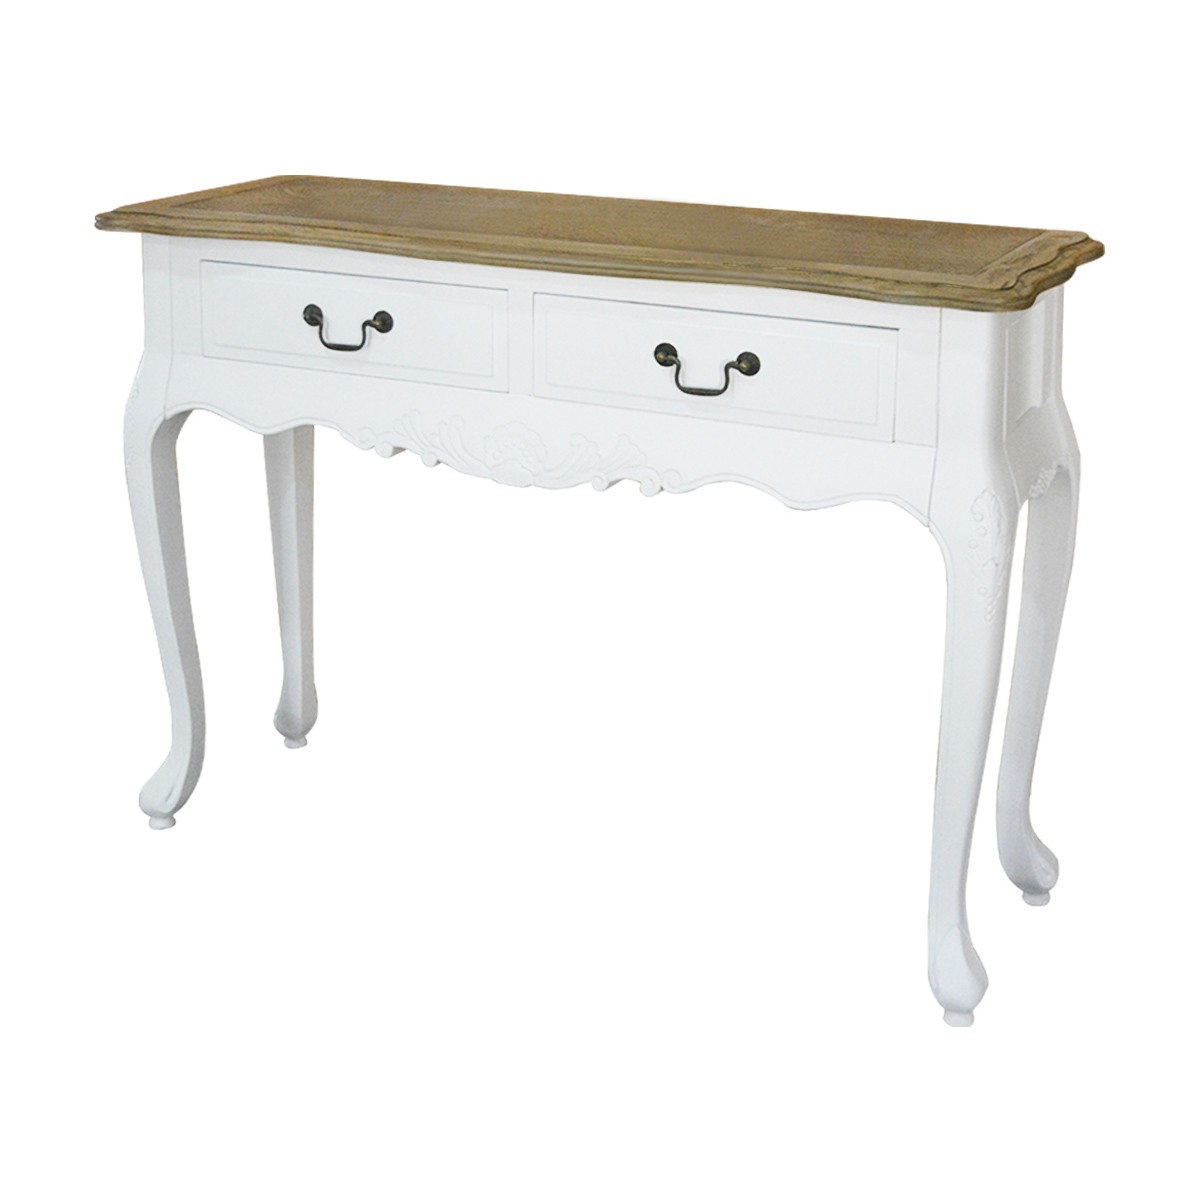 French Provincial Classic White 2 Drawer Console Hallway Table